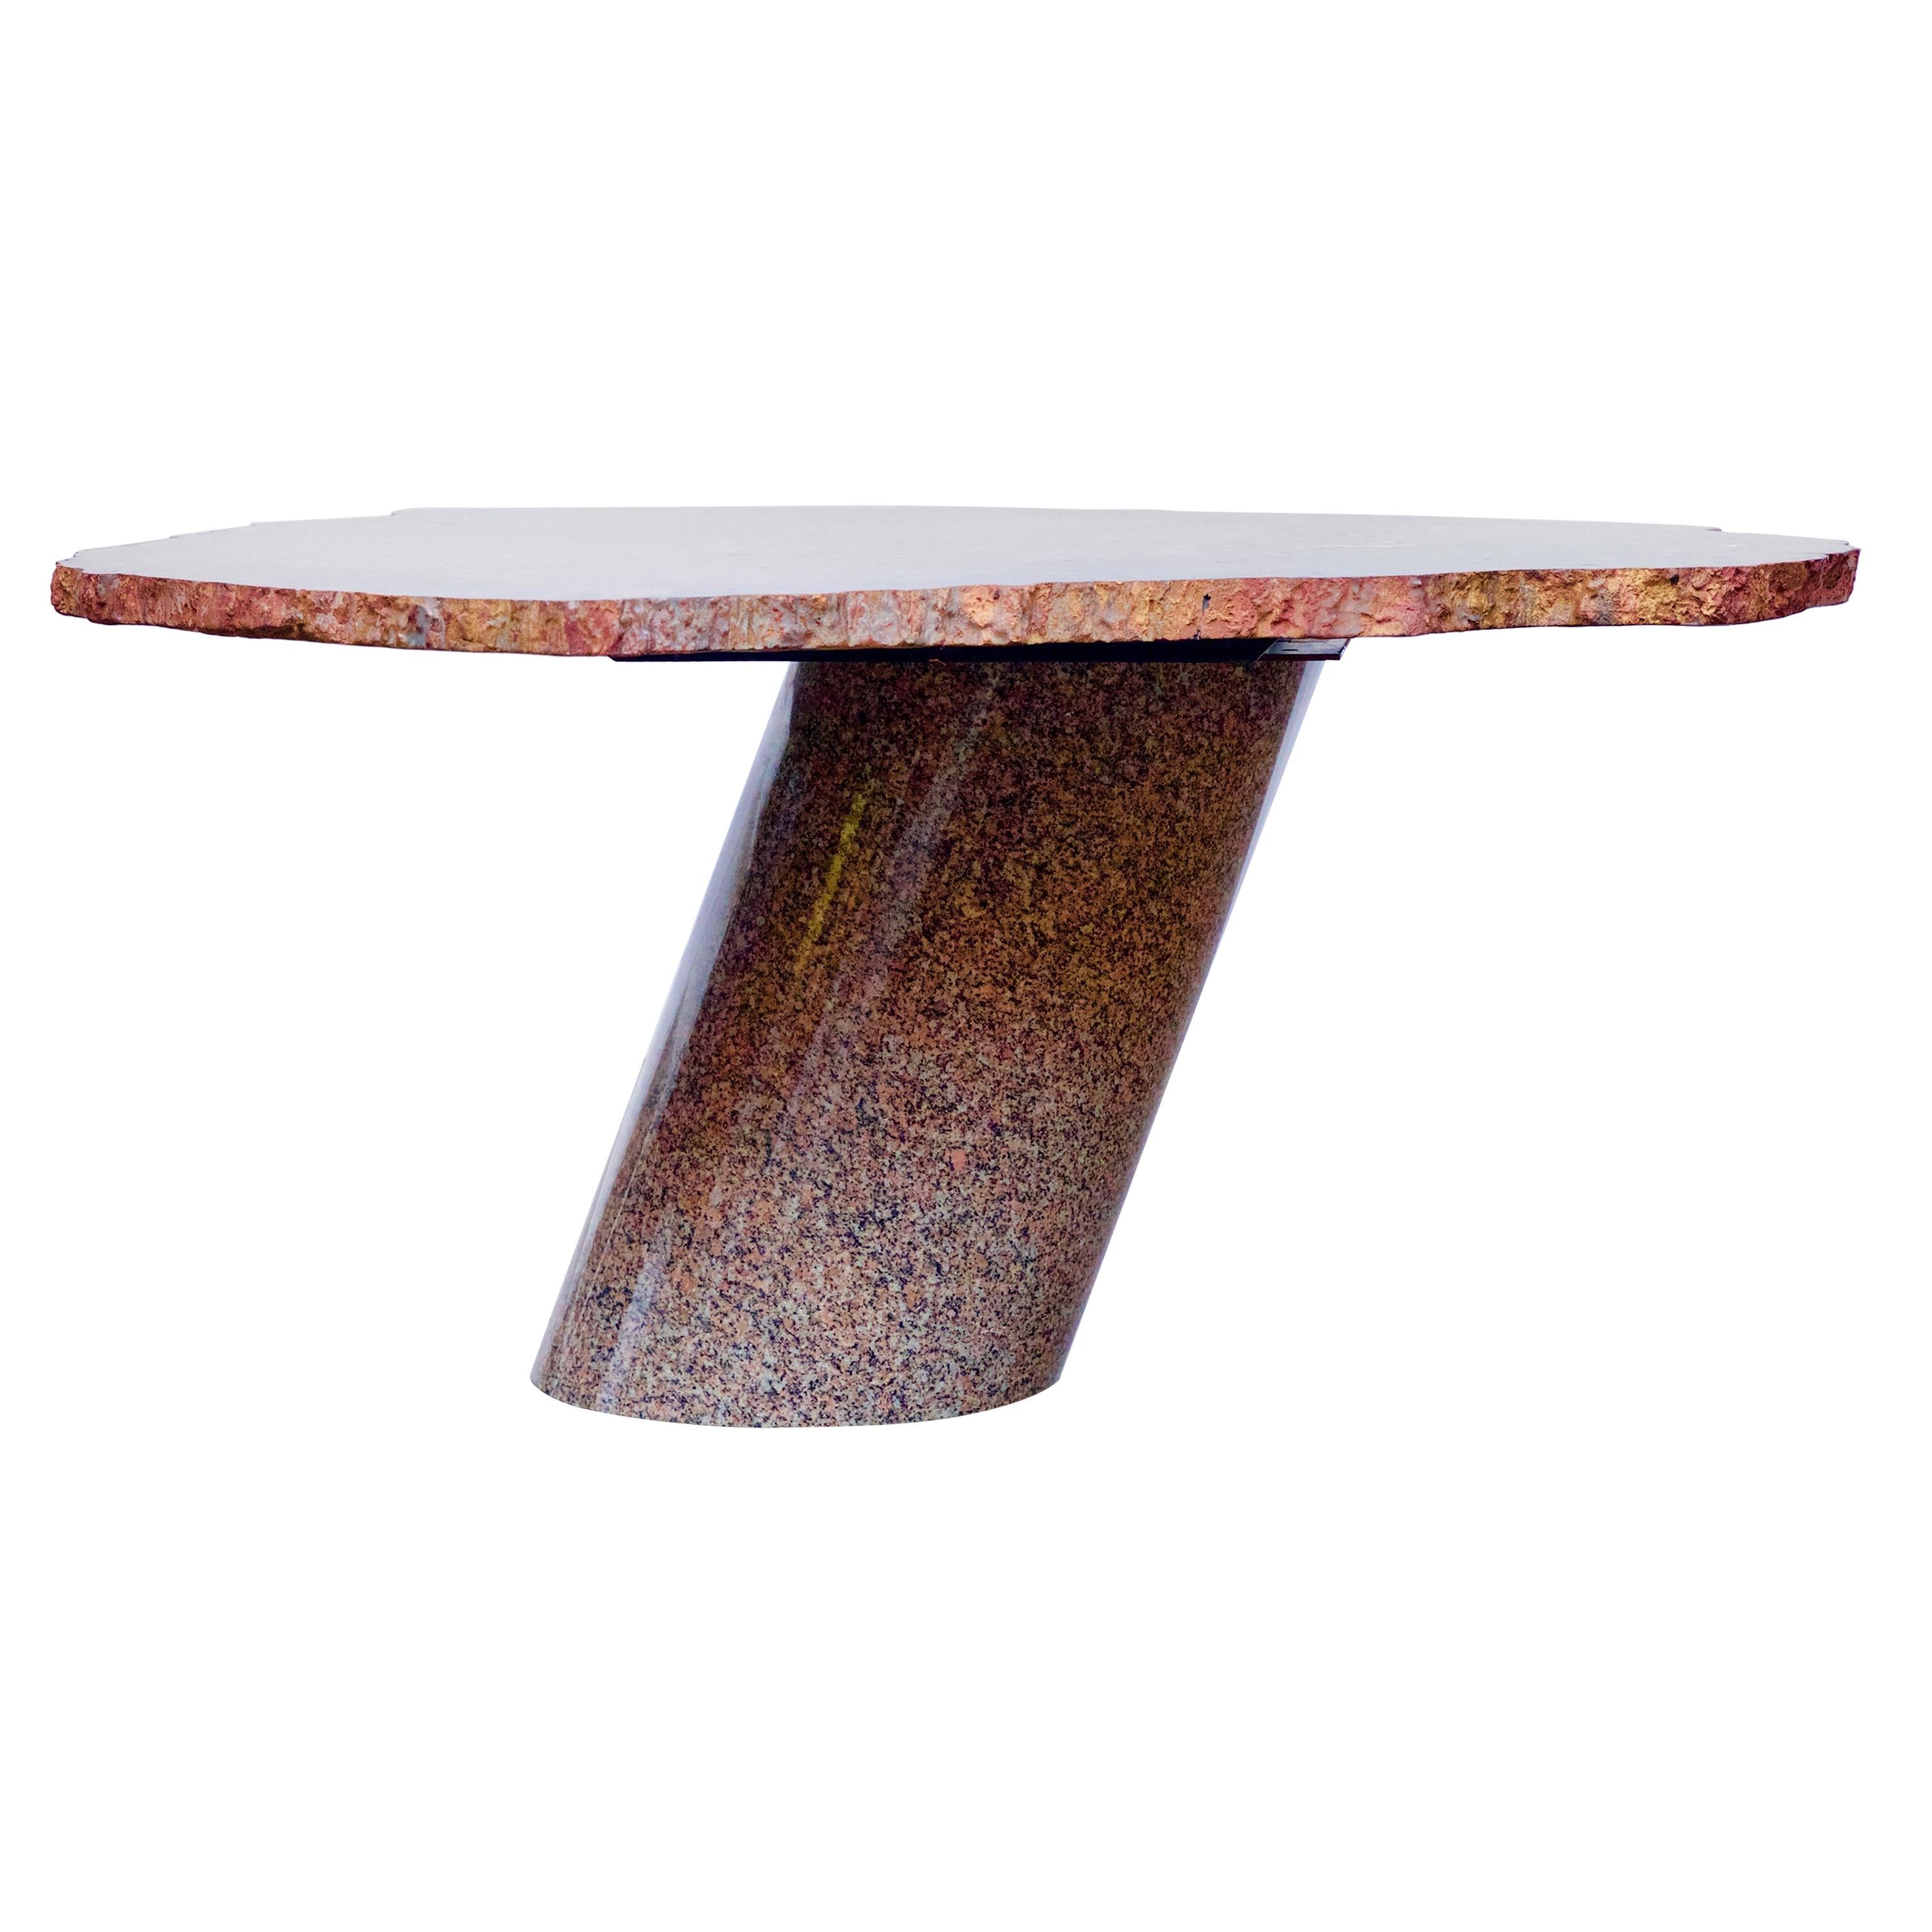 Petrified Wood Table Top with Married Granite Base 